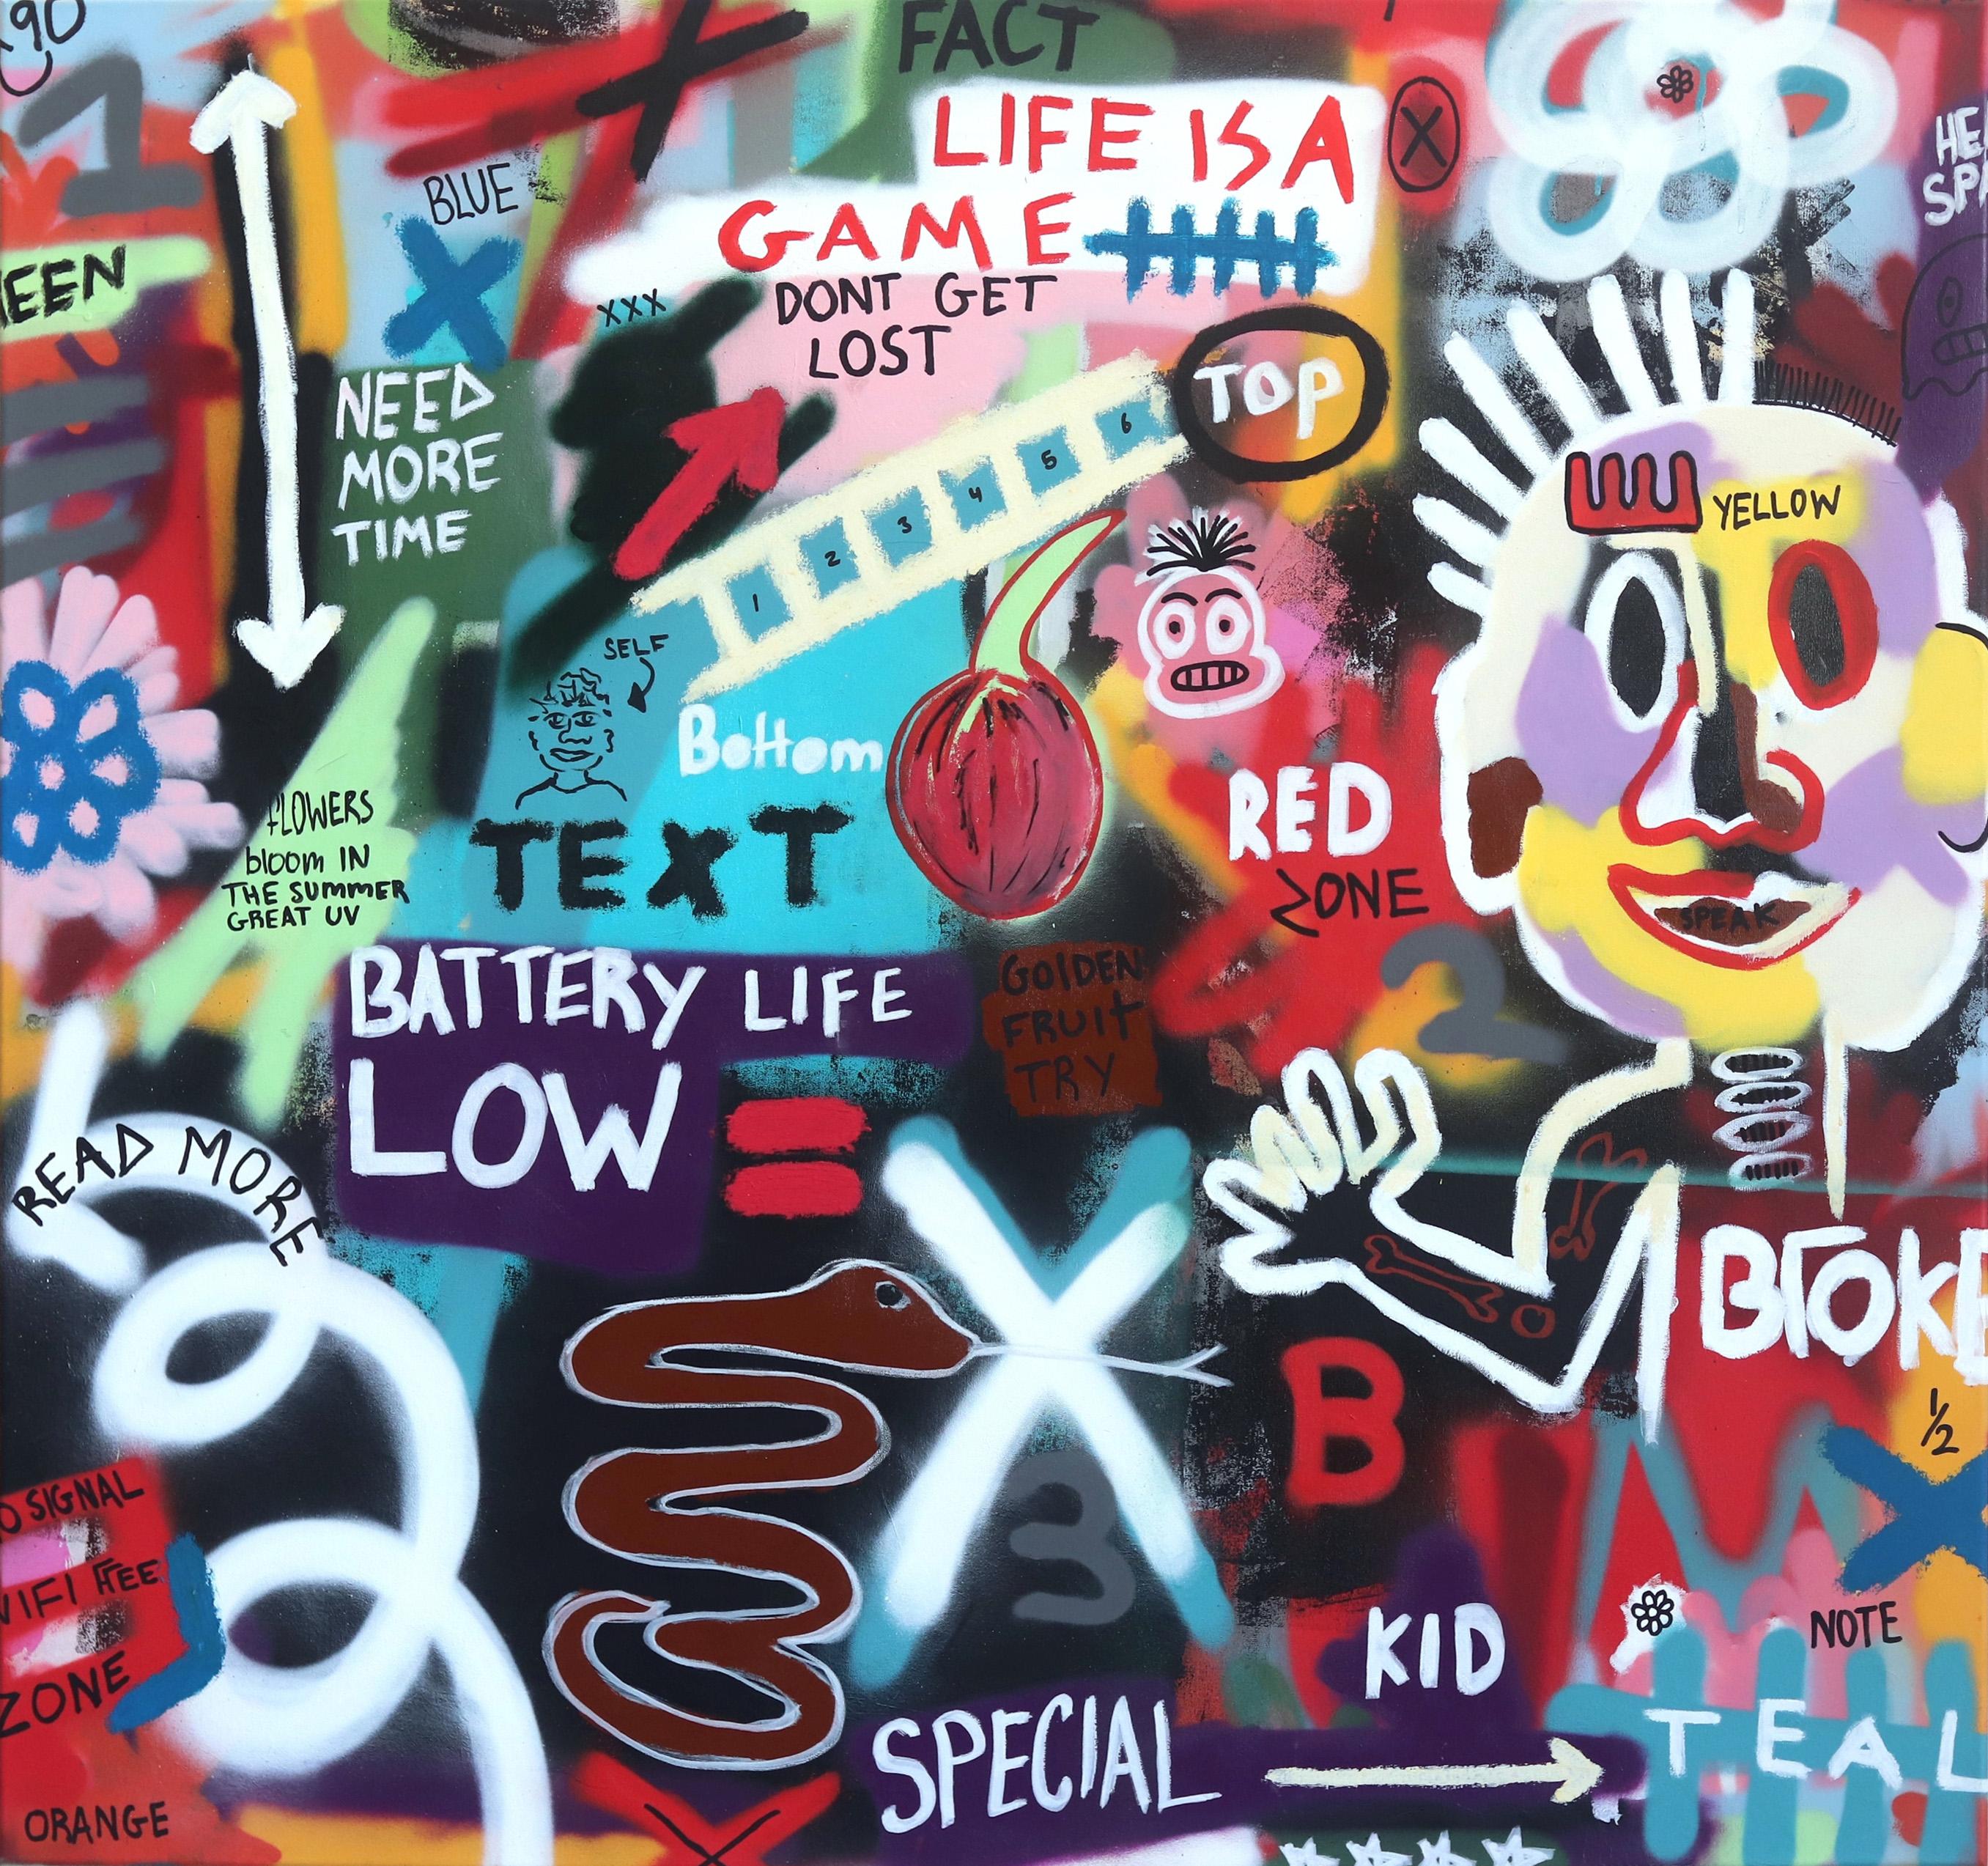 Life Is A Game - Large Colorful Contemporary Street Art Painting Figures Text